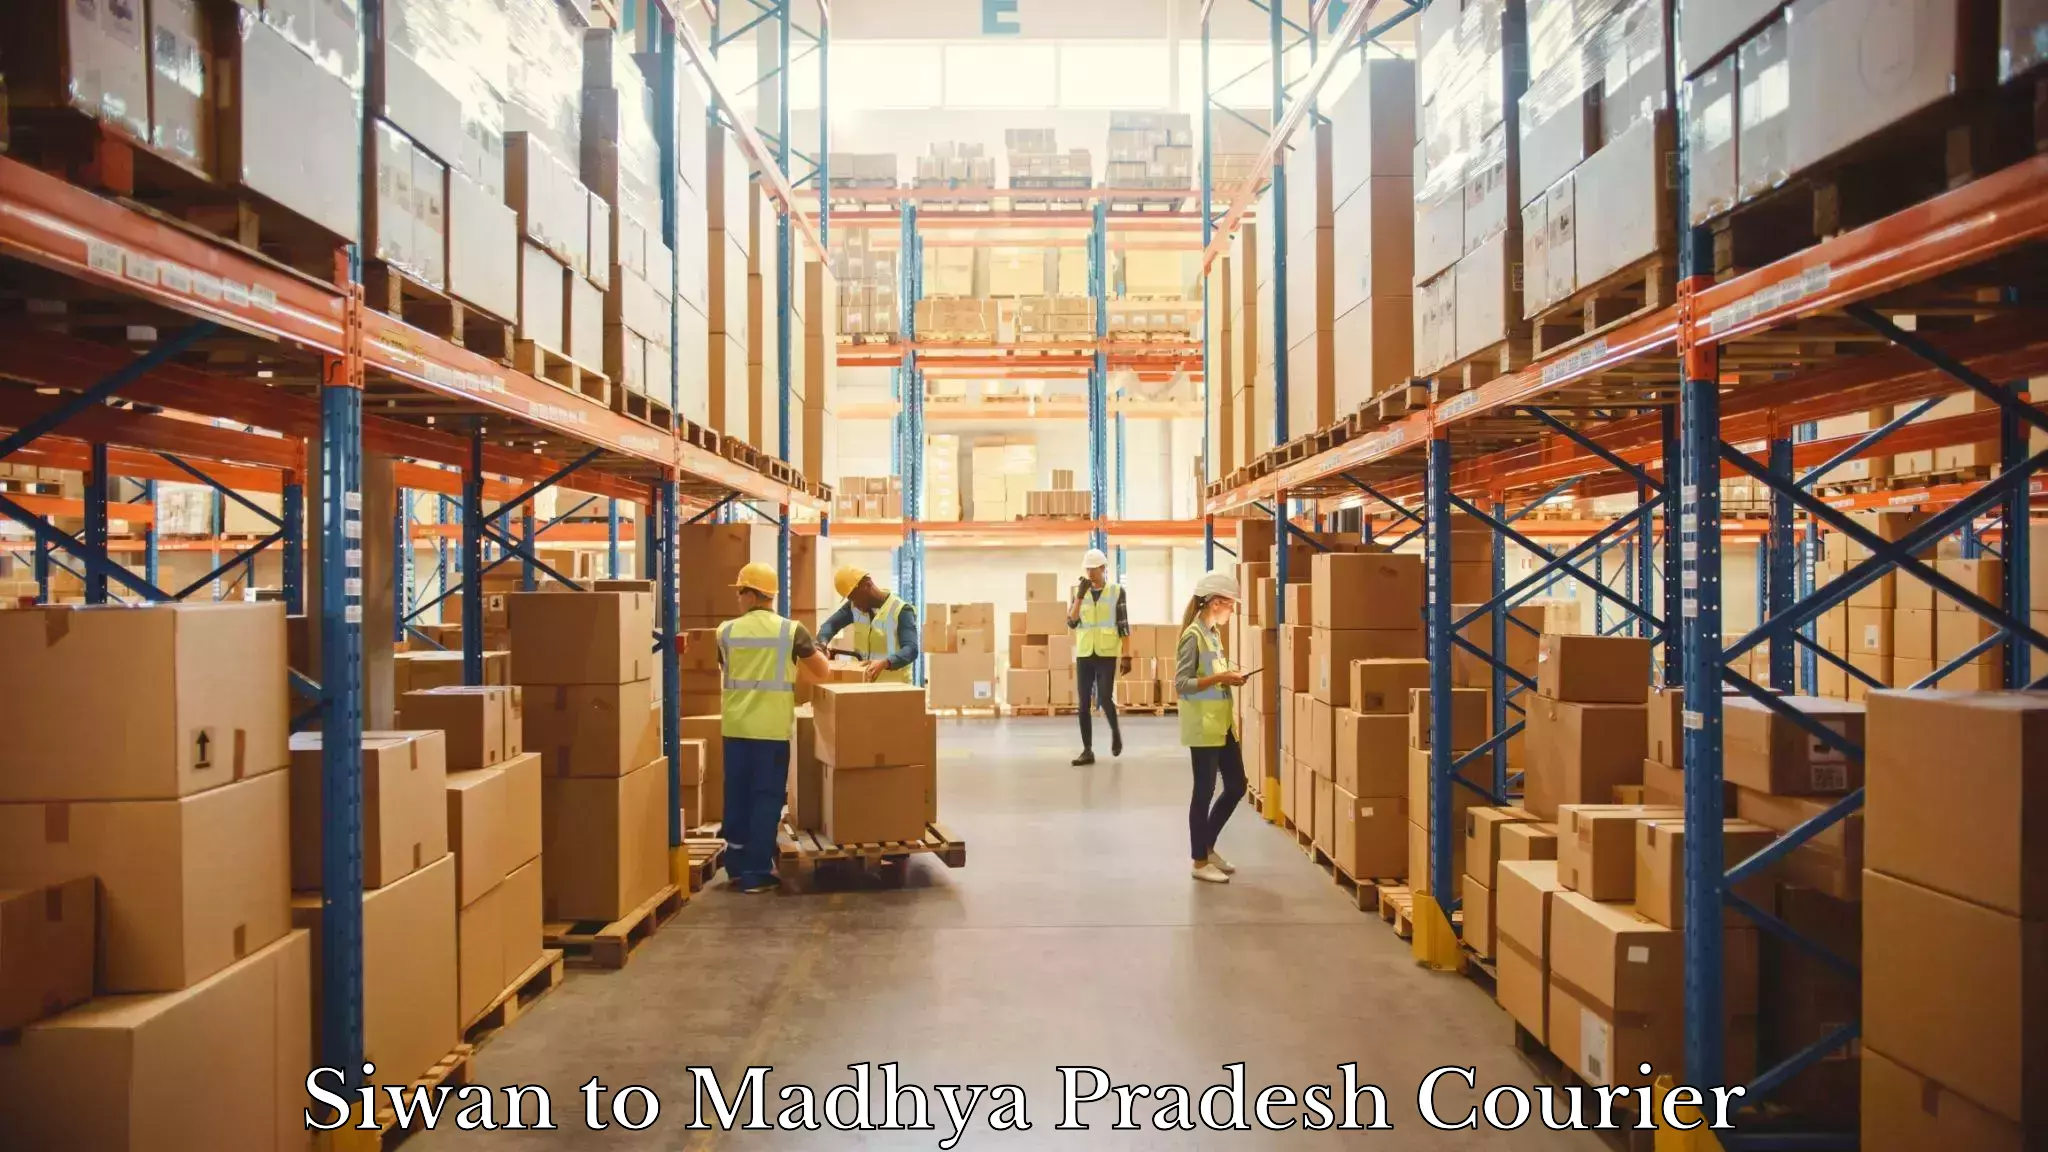 Efficient shipping operations Siwan to Indore